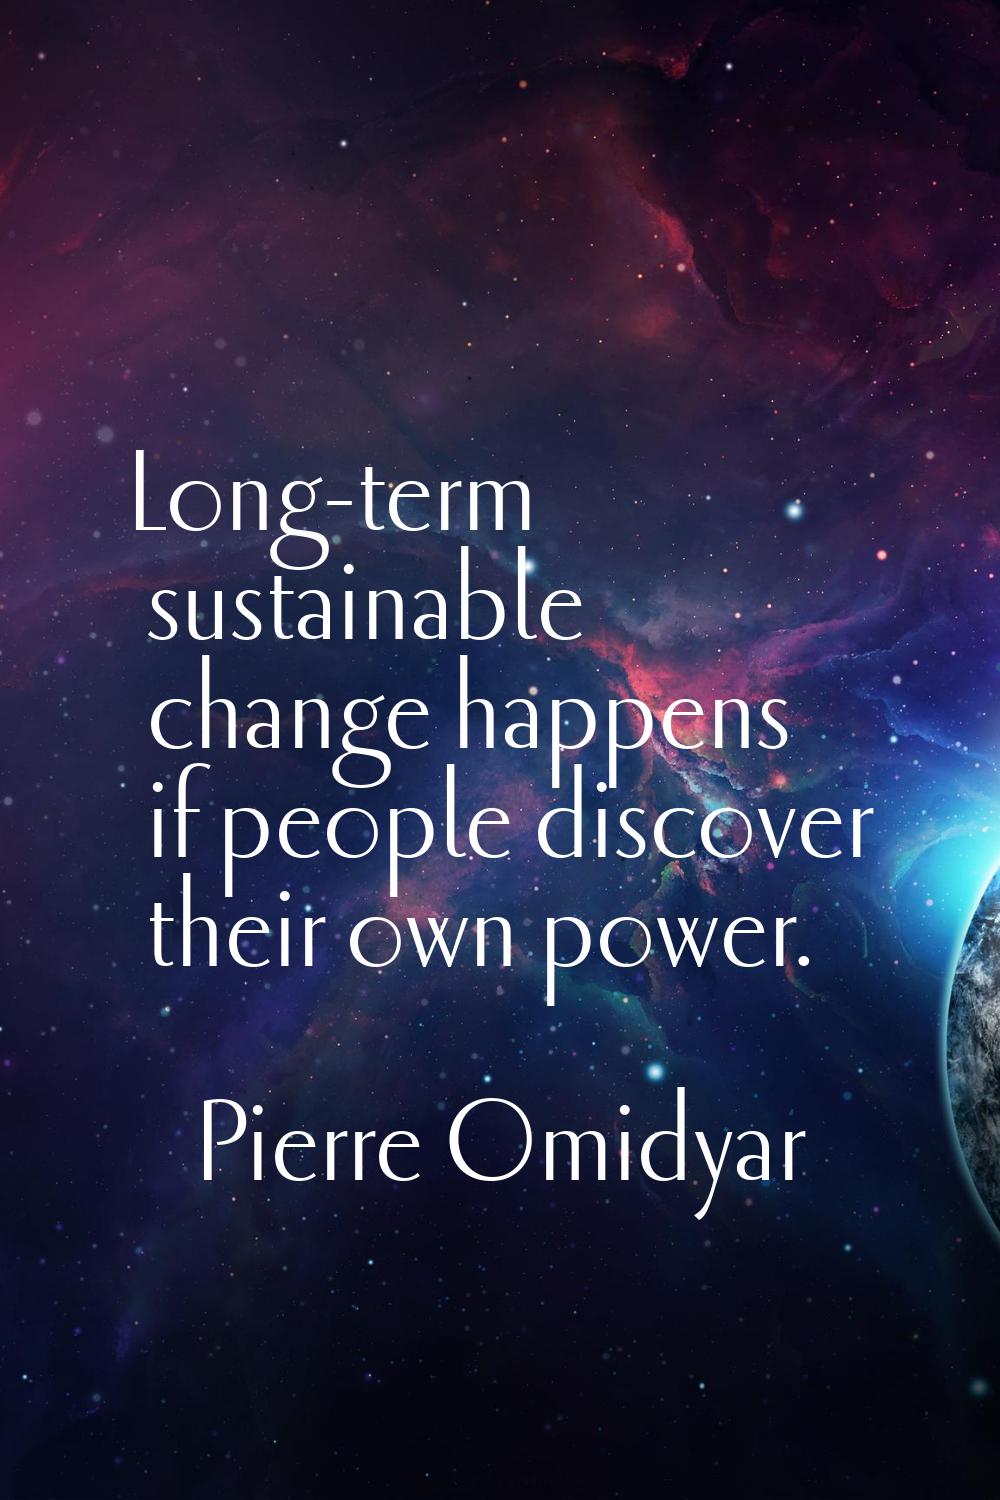 Long-term sustainable change happens if people discover their own power.